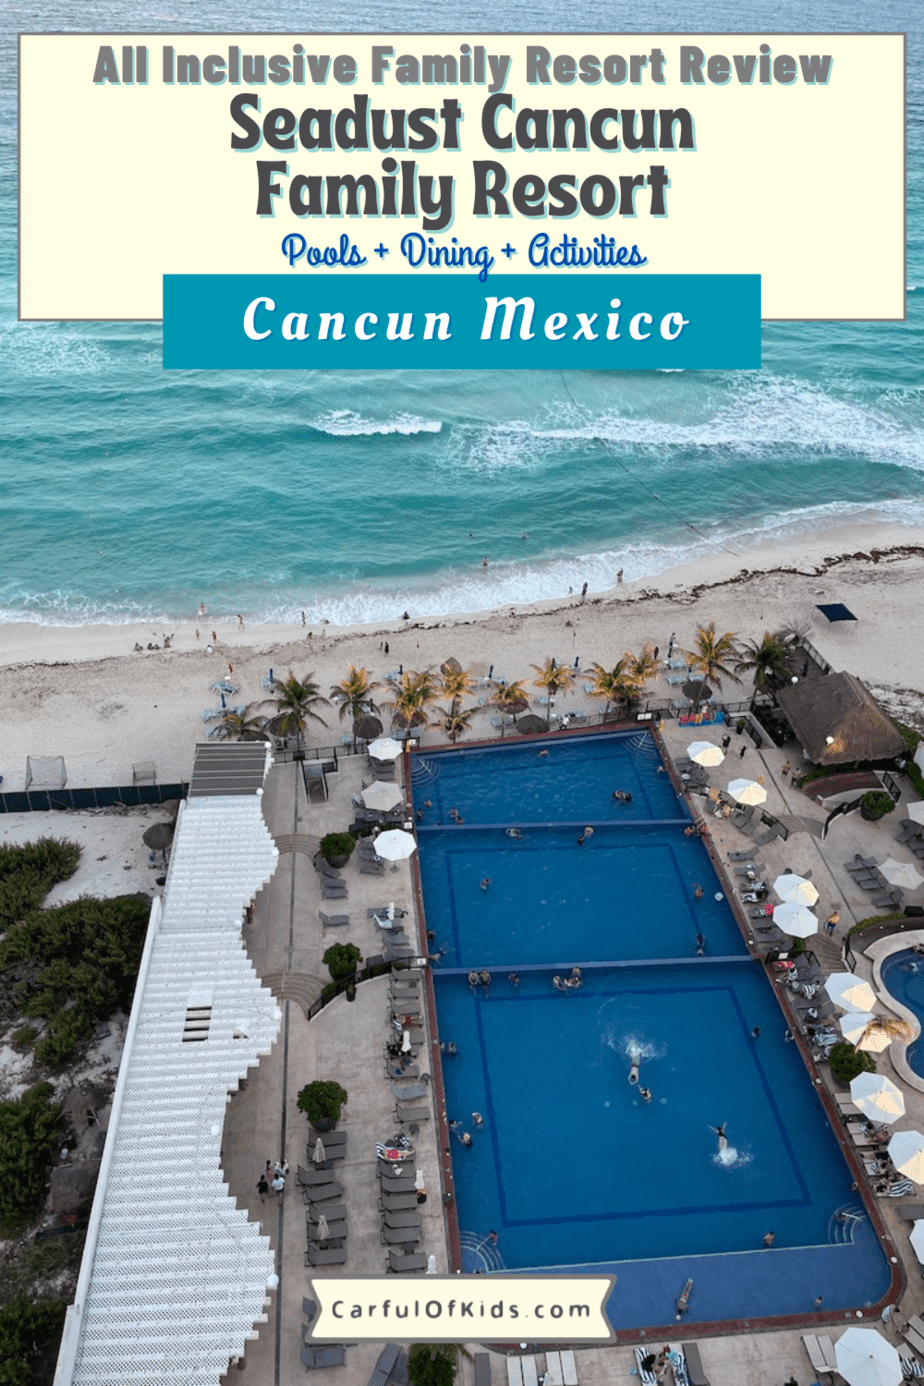 Located in Cancun's Hotel Zone, the Seadust Cancun Family Resort is a favorite. From the spacious rooms to the dining options to the pool and beach, there is lots of kids to do. Here what's new happening at the Seadust Cancun Family Resort and why is works for families. #Seadust #PlayaResorts